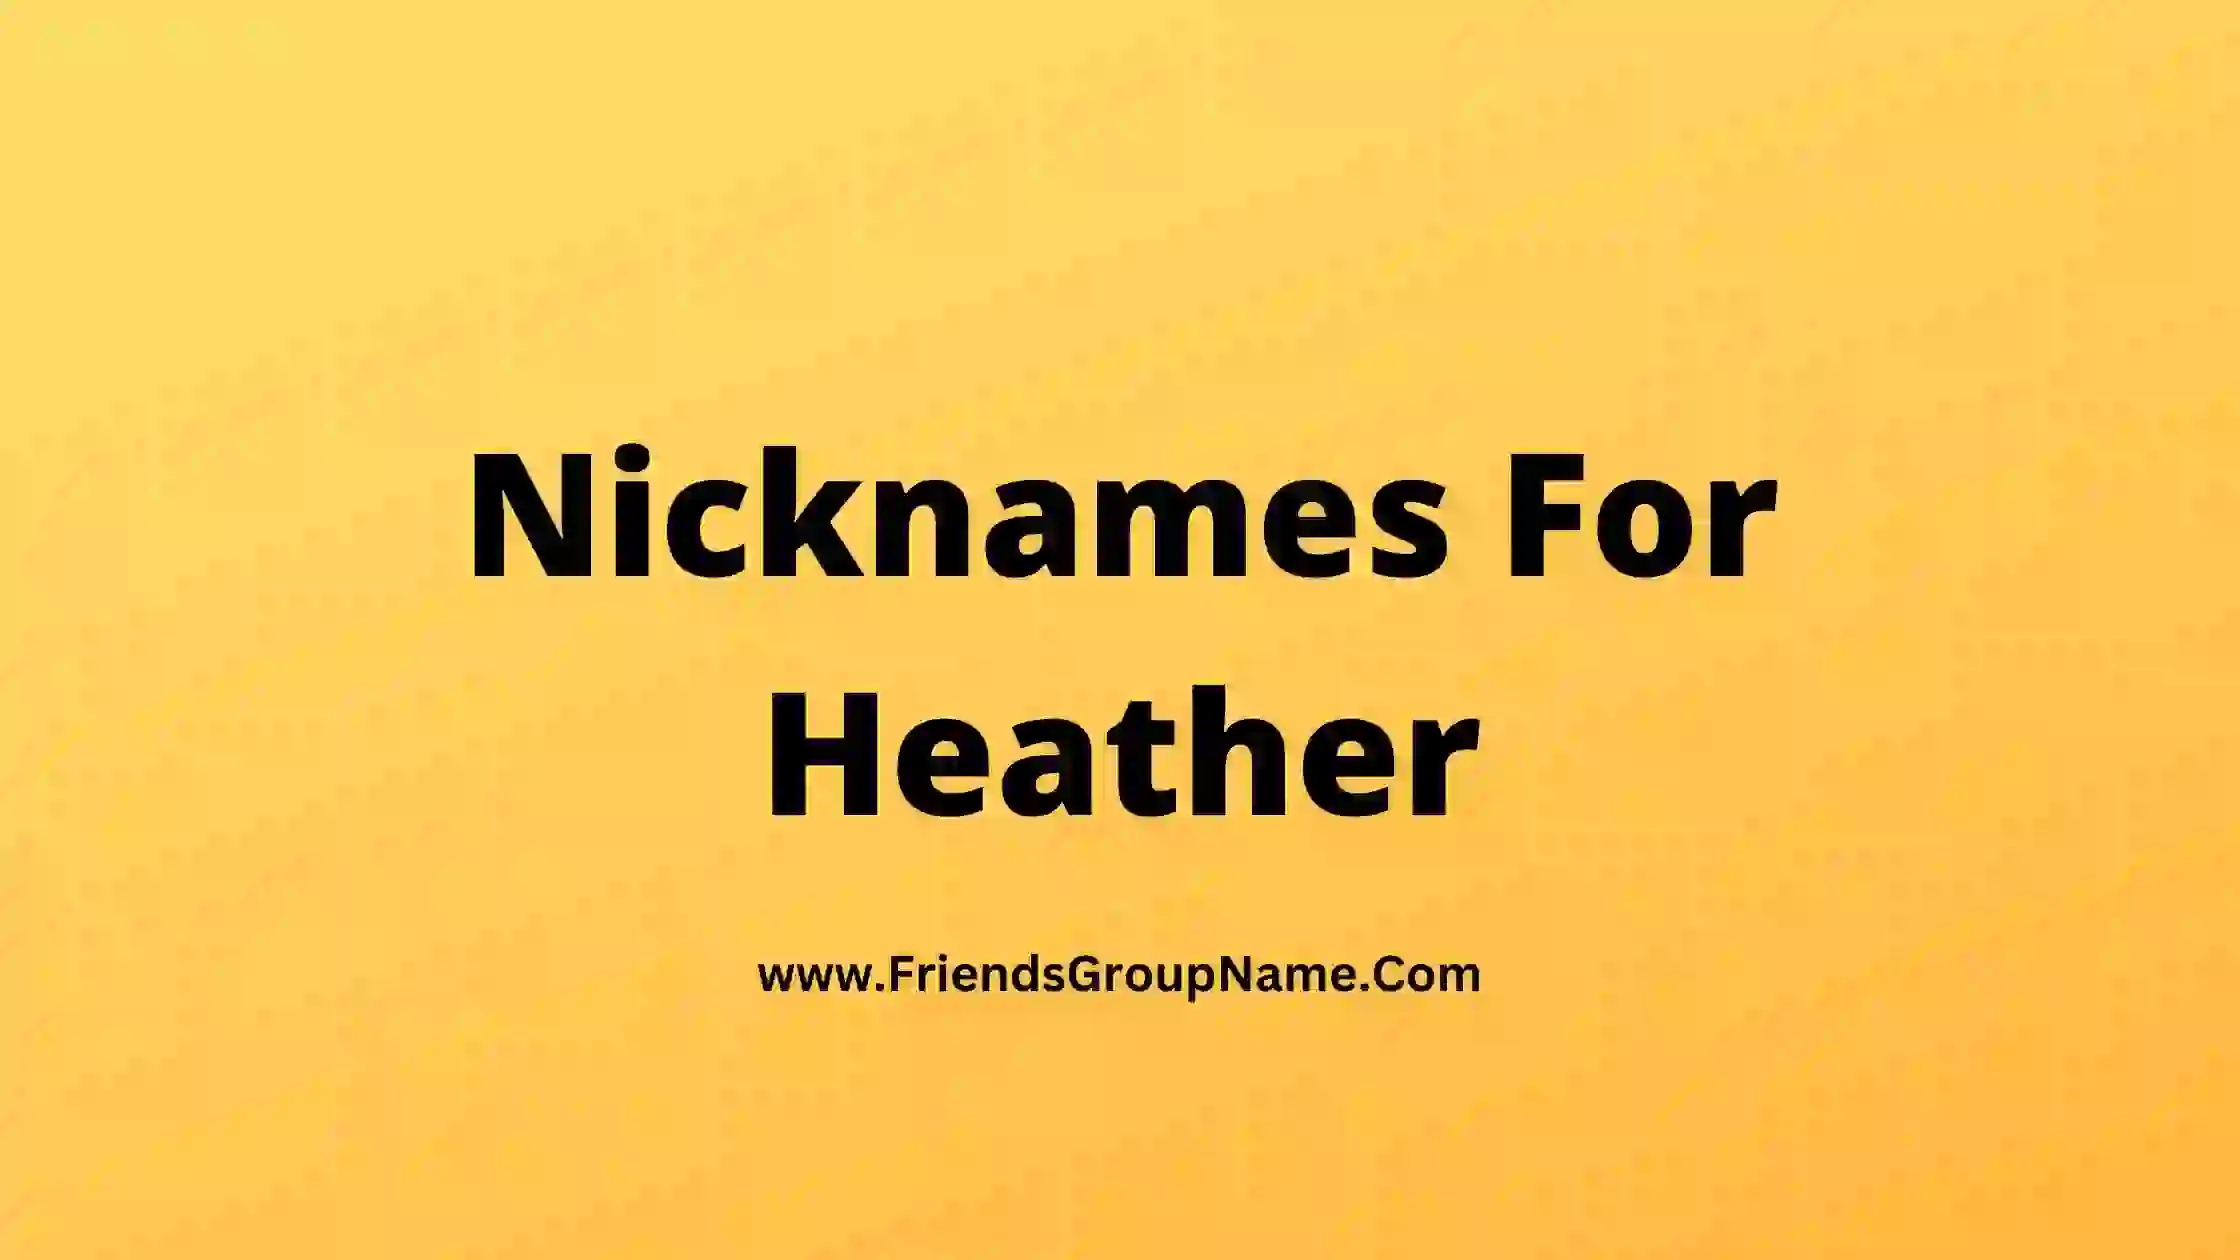 Nicknames For Heather